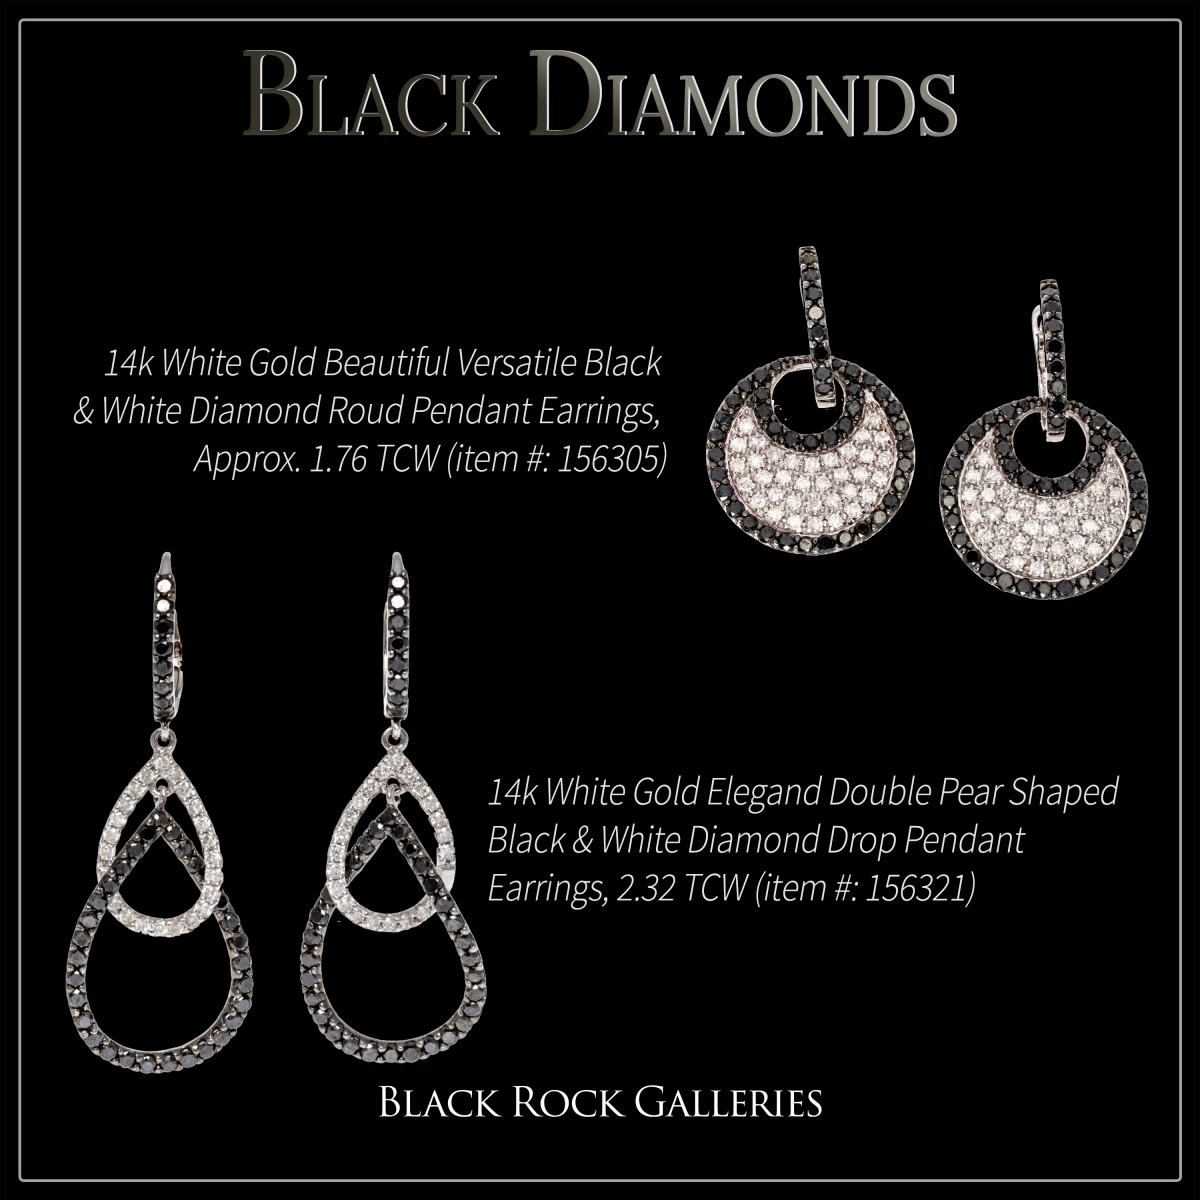 Black and White diamonds highlight the April are for Diamonds online auction